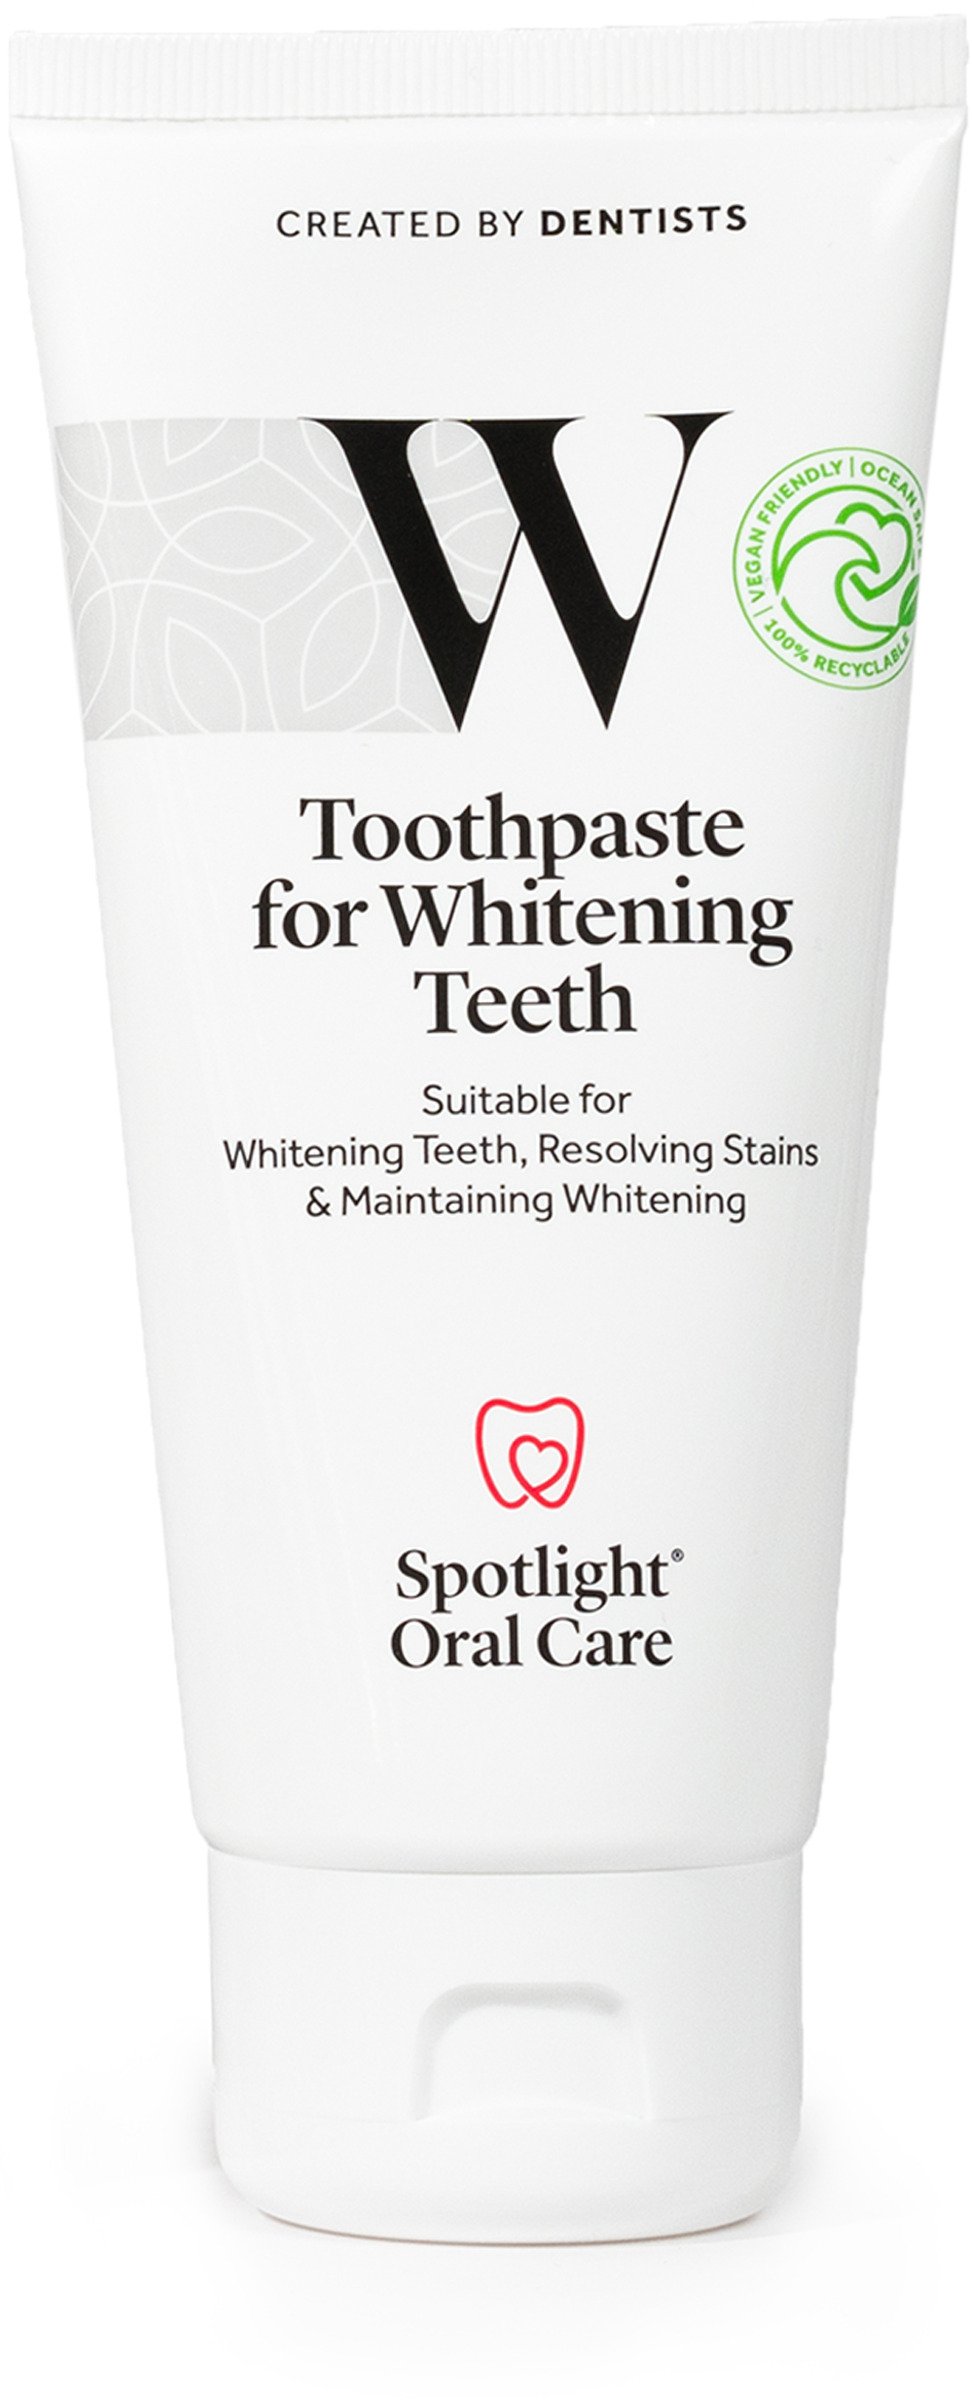 Spotlight Oral Care Toothpaste for Whitening Teeth 100 ml